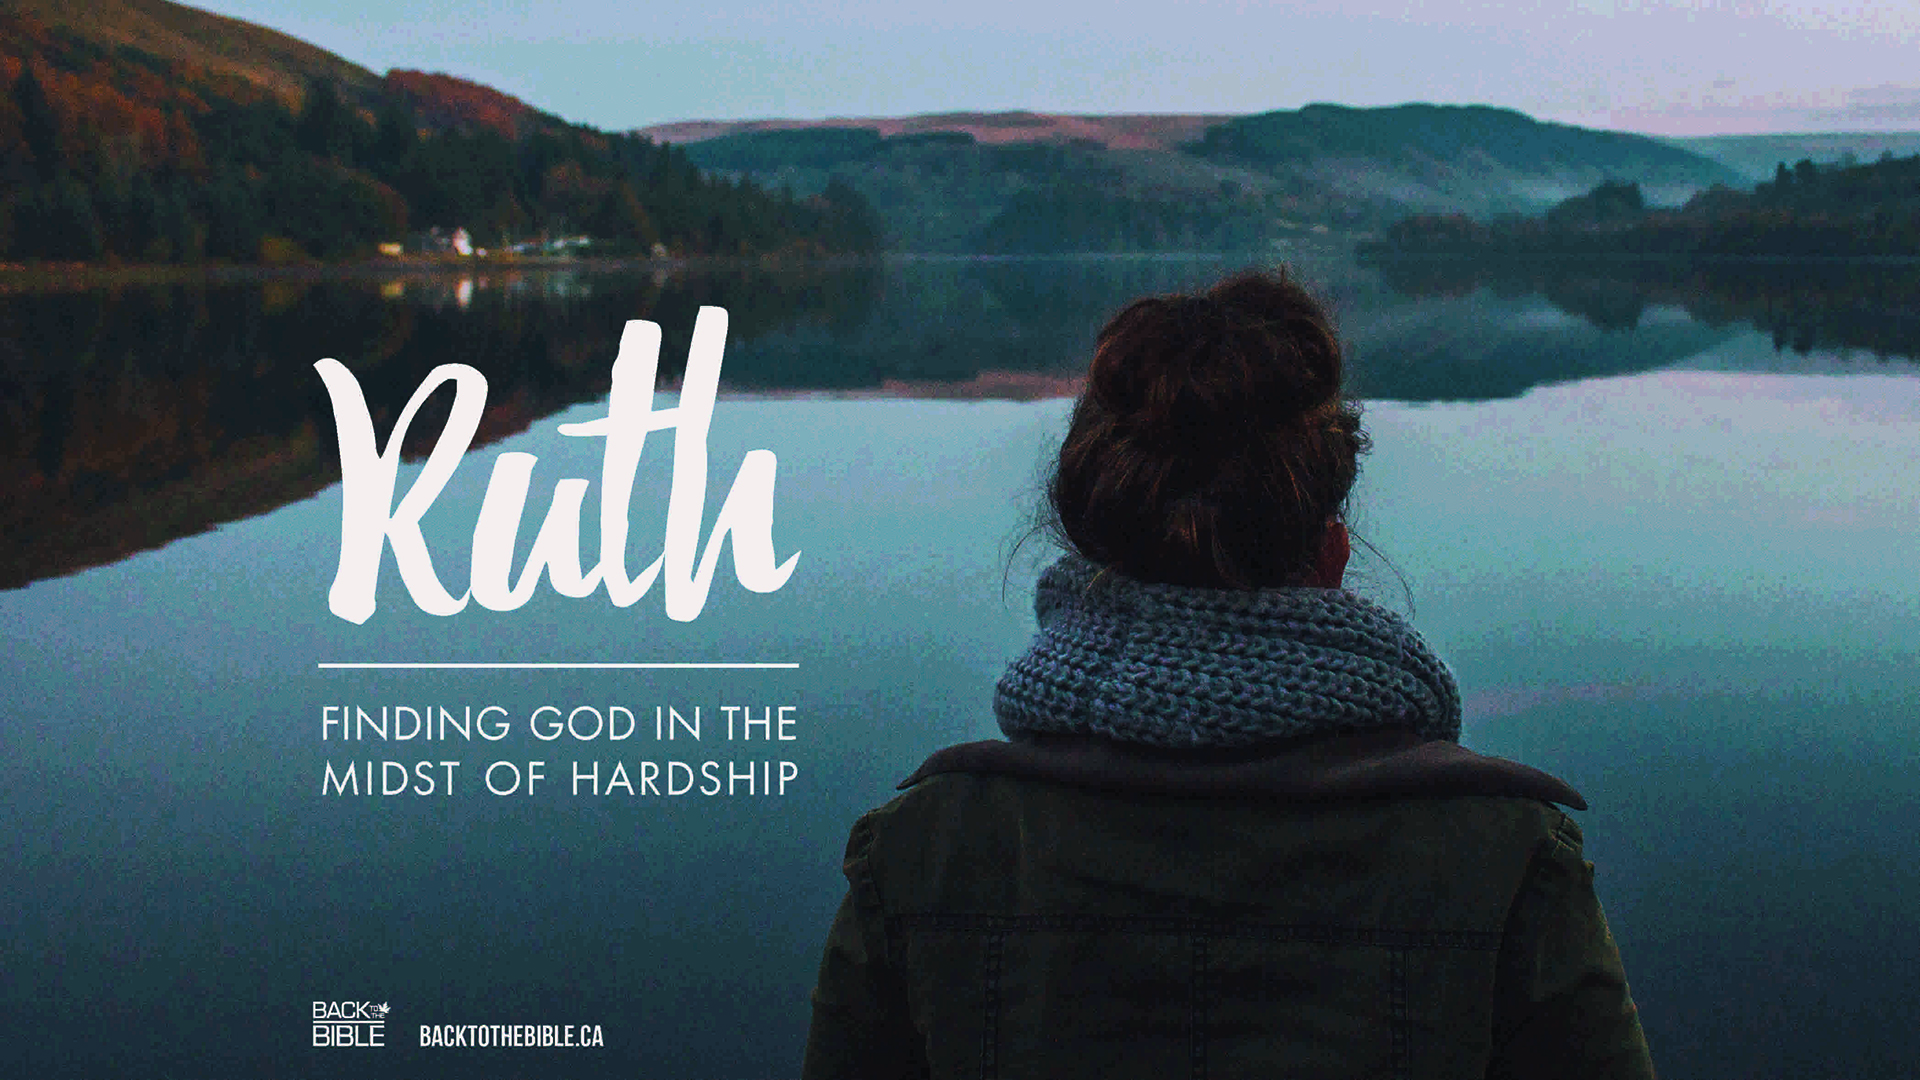 Ruth: Finding God in the Midst of Hardship